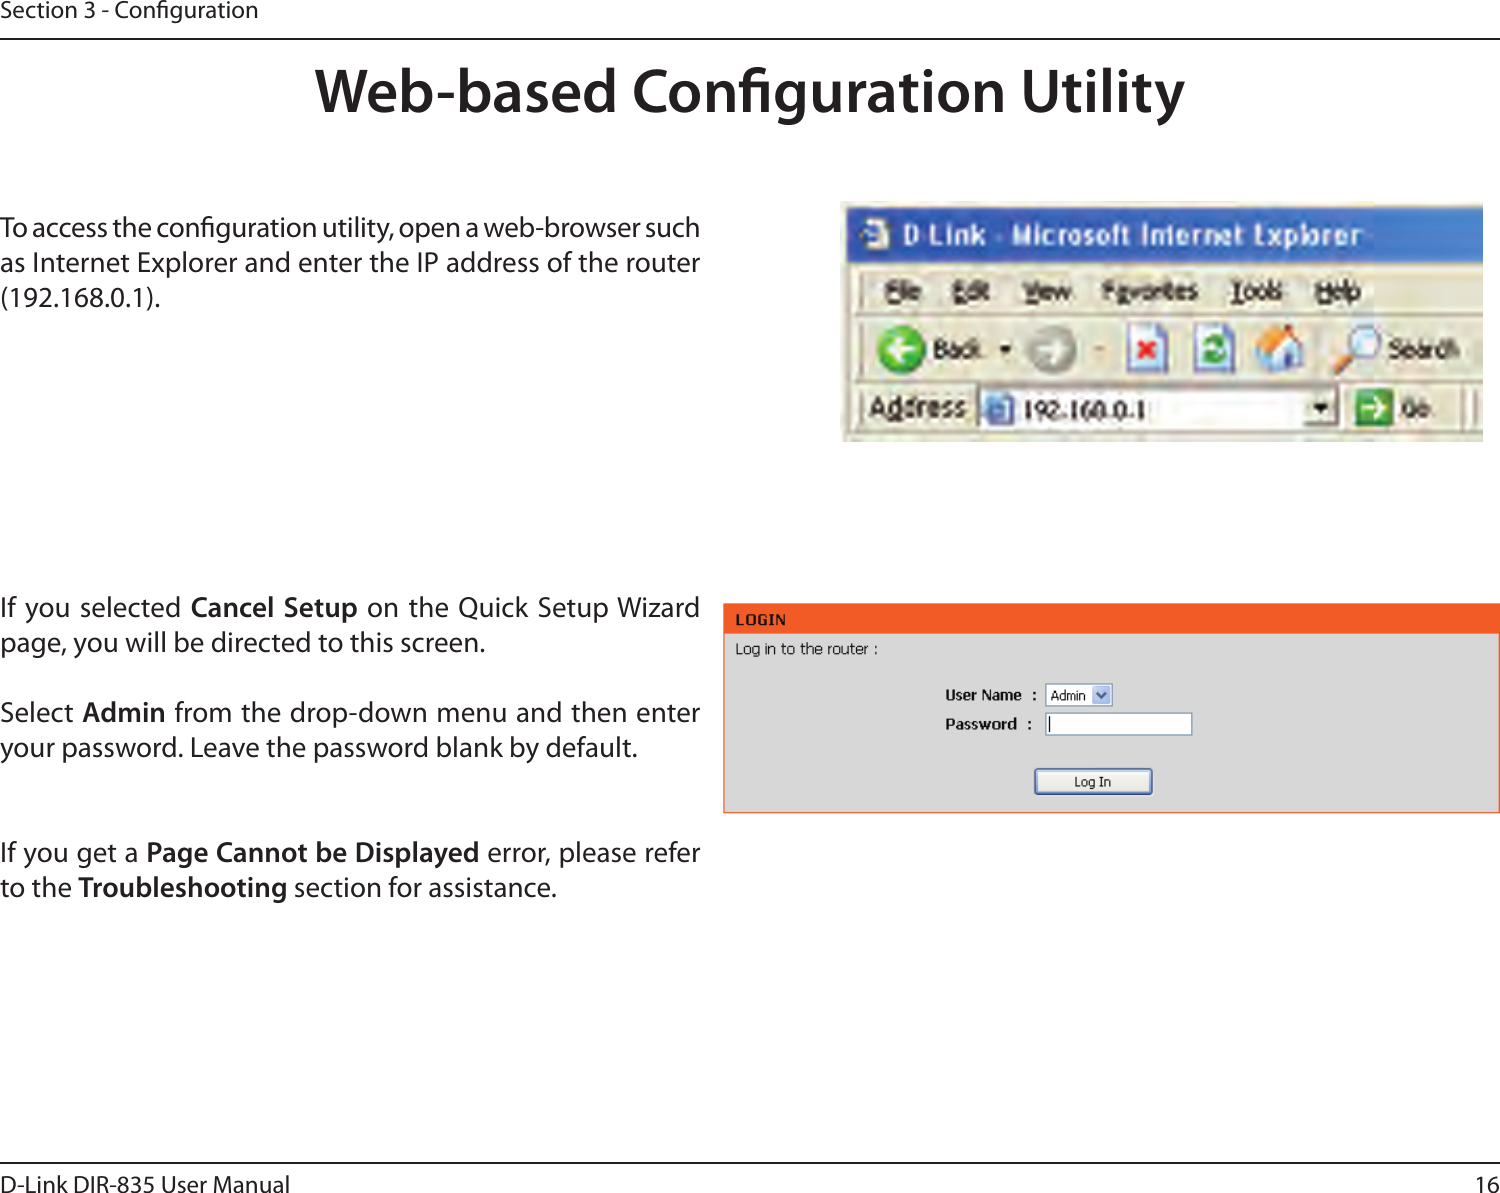 16D-Link DIR-835 User ManualSection 3 - CongurationWeb-based Conguration UtilityTo access the conguration utility, open a web-browser such as Internet Explorer and enter the IP address of the router (192.168.0.1).If you selected Cancel Setup  on the Quick  Setup Wizard page, you will be directed to this screen. Select Admin from the drop-down menu and then enter your password. Leave the password blank by default.If you get a Page Cannot be Displayed error, please refer to the Troubleshooting section for assistance.